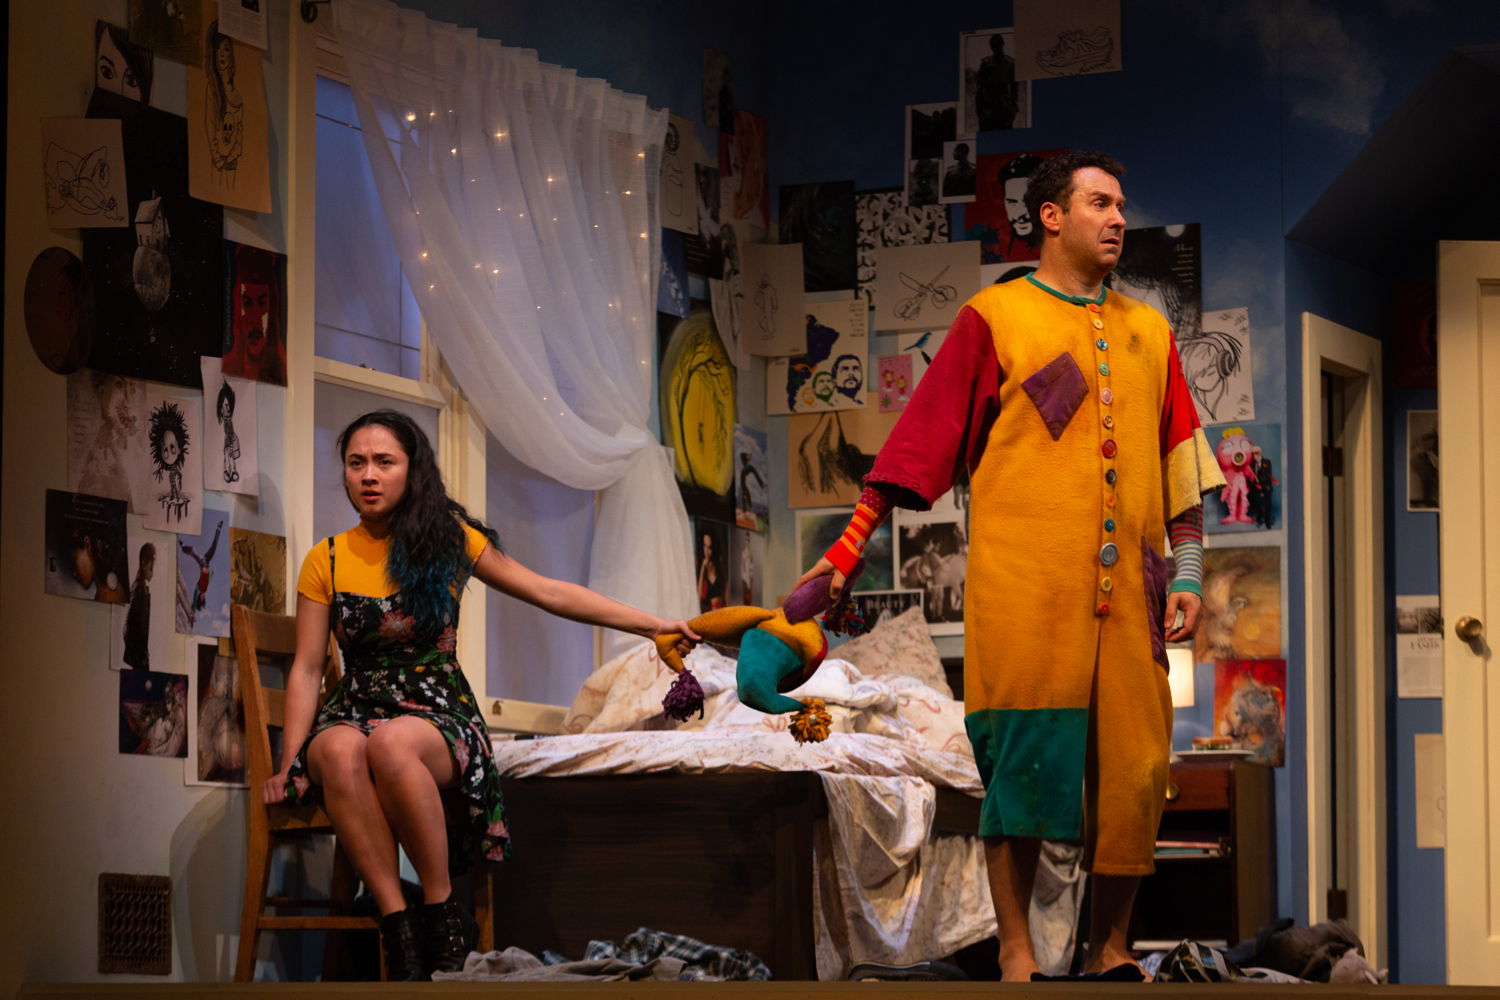 Heidi Damayo (Thai) and Andrew McNee (Mustard) in Mustard by Kat Sandler / Photos by Mark Halliday

October 30 – November 25, 2018
<a href="https://www.belfry.bc.ca/mustard/" rel="nofollow">www.belfry.bc.ca/mustard/</a>
Belfry Theatre, 1291 Gladstone Avenue, Victoria, British Columbia, Canada

A co-production with the Arts Club Theatre, Vancouver

Creative Team
Kat Sandler - Playwright
Stephen Drover - Director
Kevin McAllister - Set Designer
Carmen Alatorre - Costume Designer
Alan Brodie - Lighting Designer
Brian Linds - Sound Designer
Jan Hodgson - Stage Manager
Jennifer Swan - Assistant Stage Manager
Ranleigh Starling - Assistant Lighting Designer
